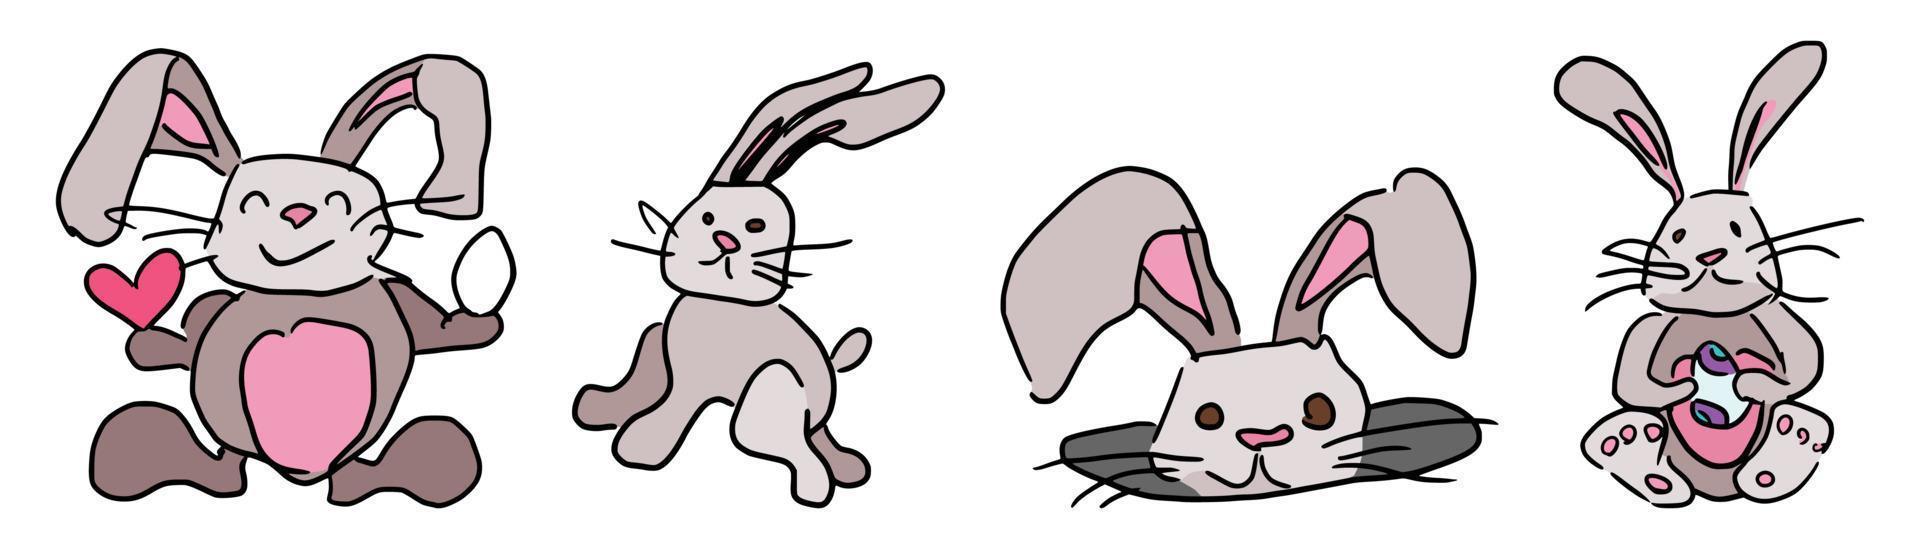 doodle animals bunny for easter holiday vector